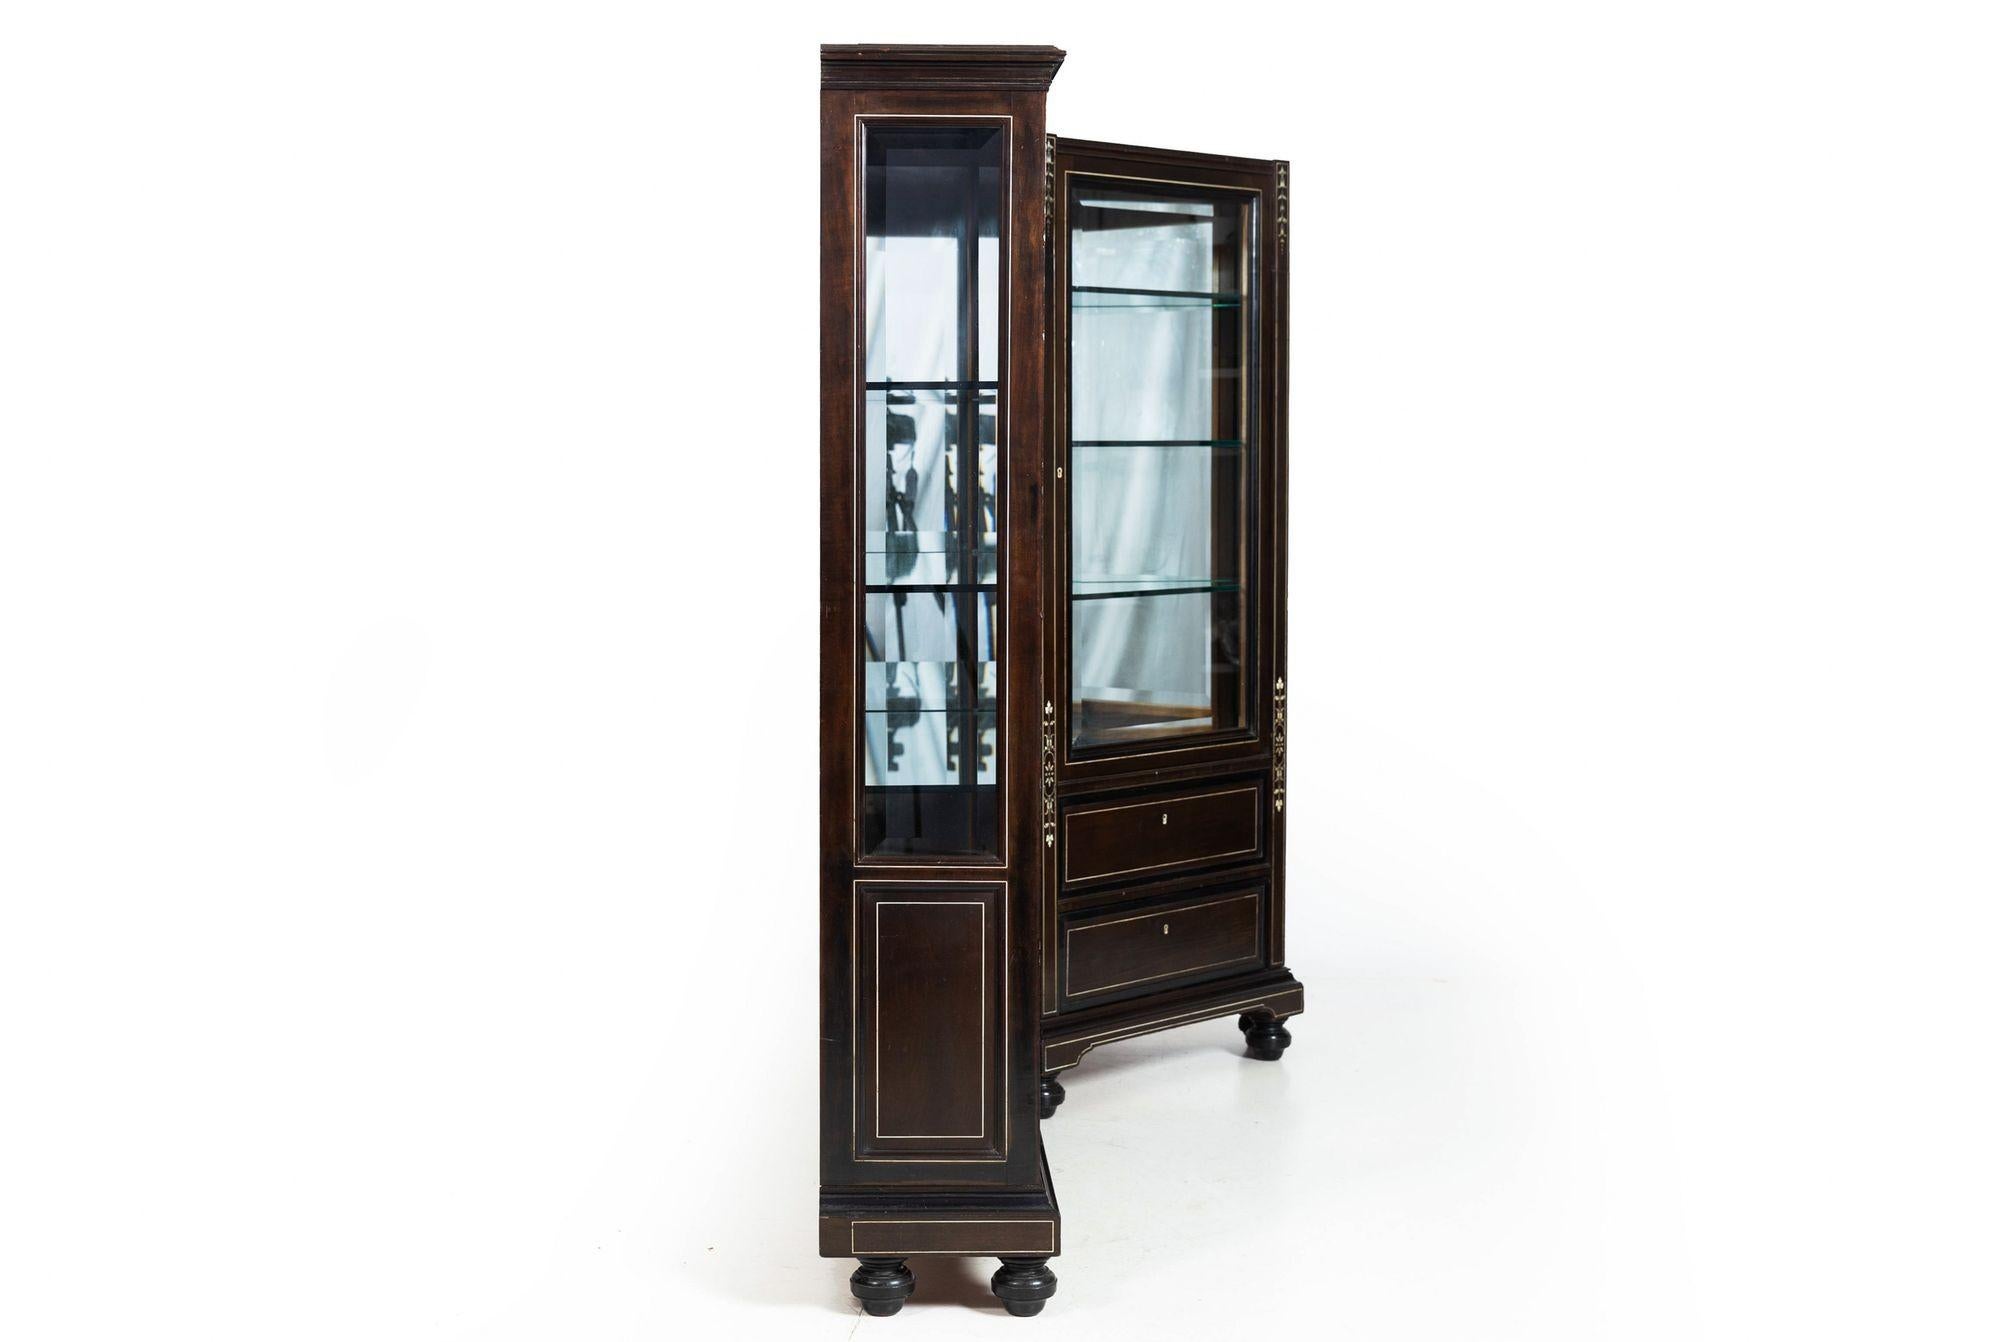 20th Century German Edwardian Ebony and Inlaid Two-Part Corner Display Cabinet circa 1900 For Sale